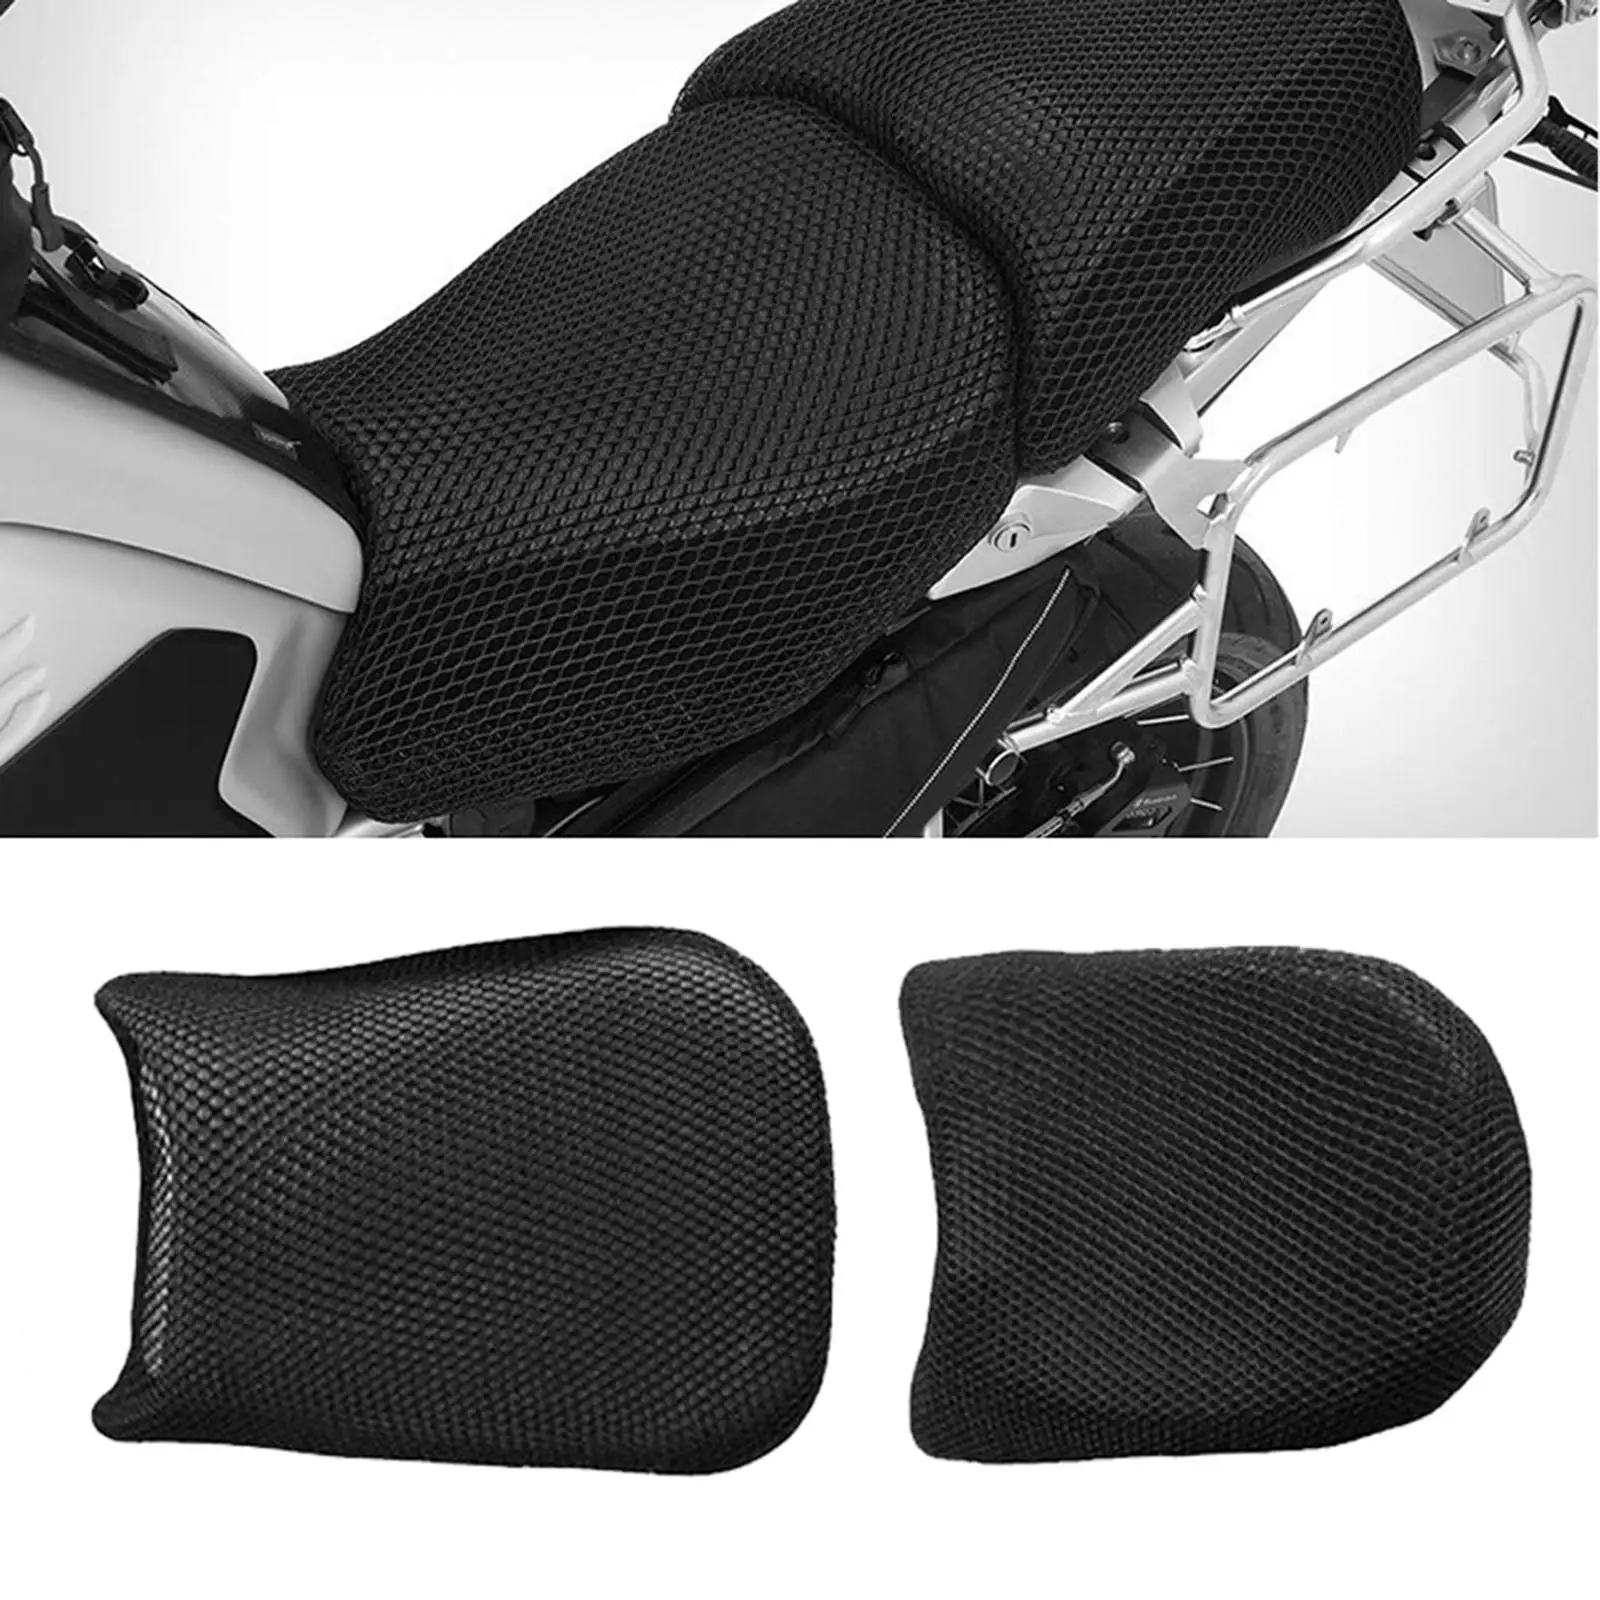 Sport Motorcycle Bikes Comfort Saddle Seat Pillow Pads Covers Comfortable Pressure Relief Accessories For  R1200GS R 1200 GS